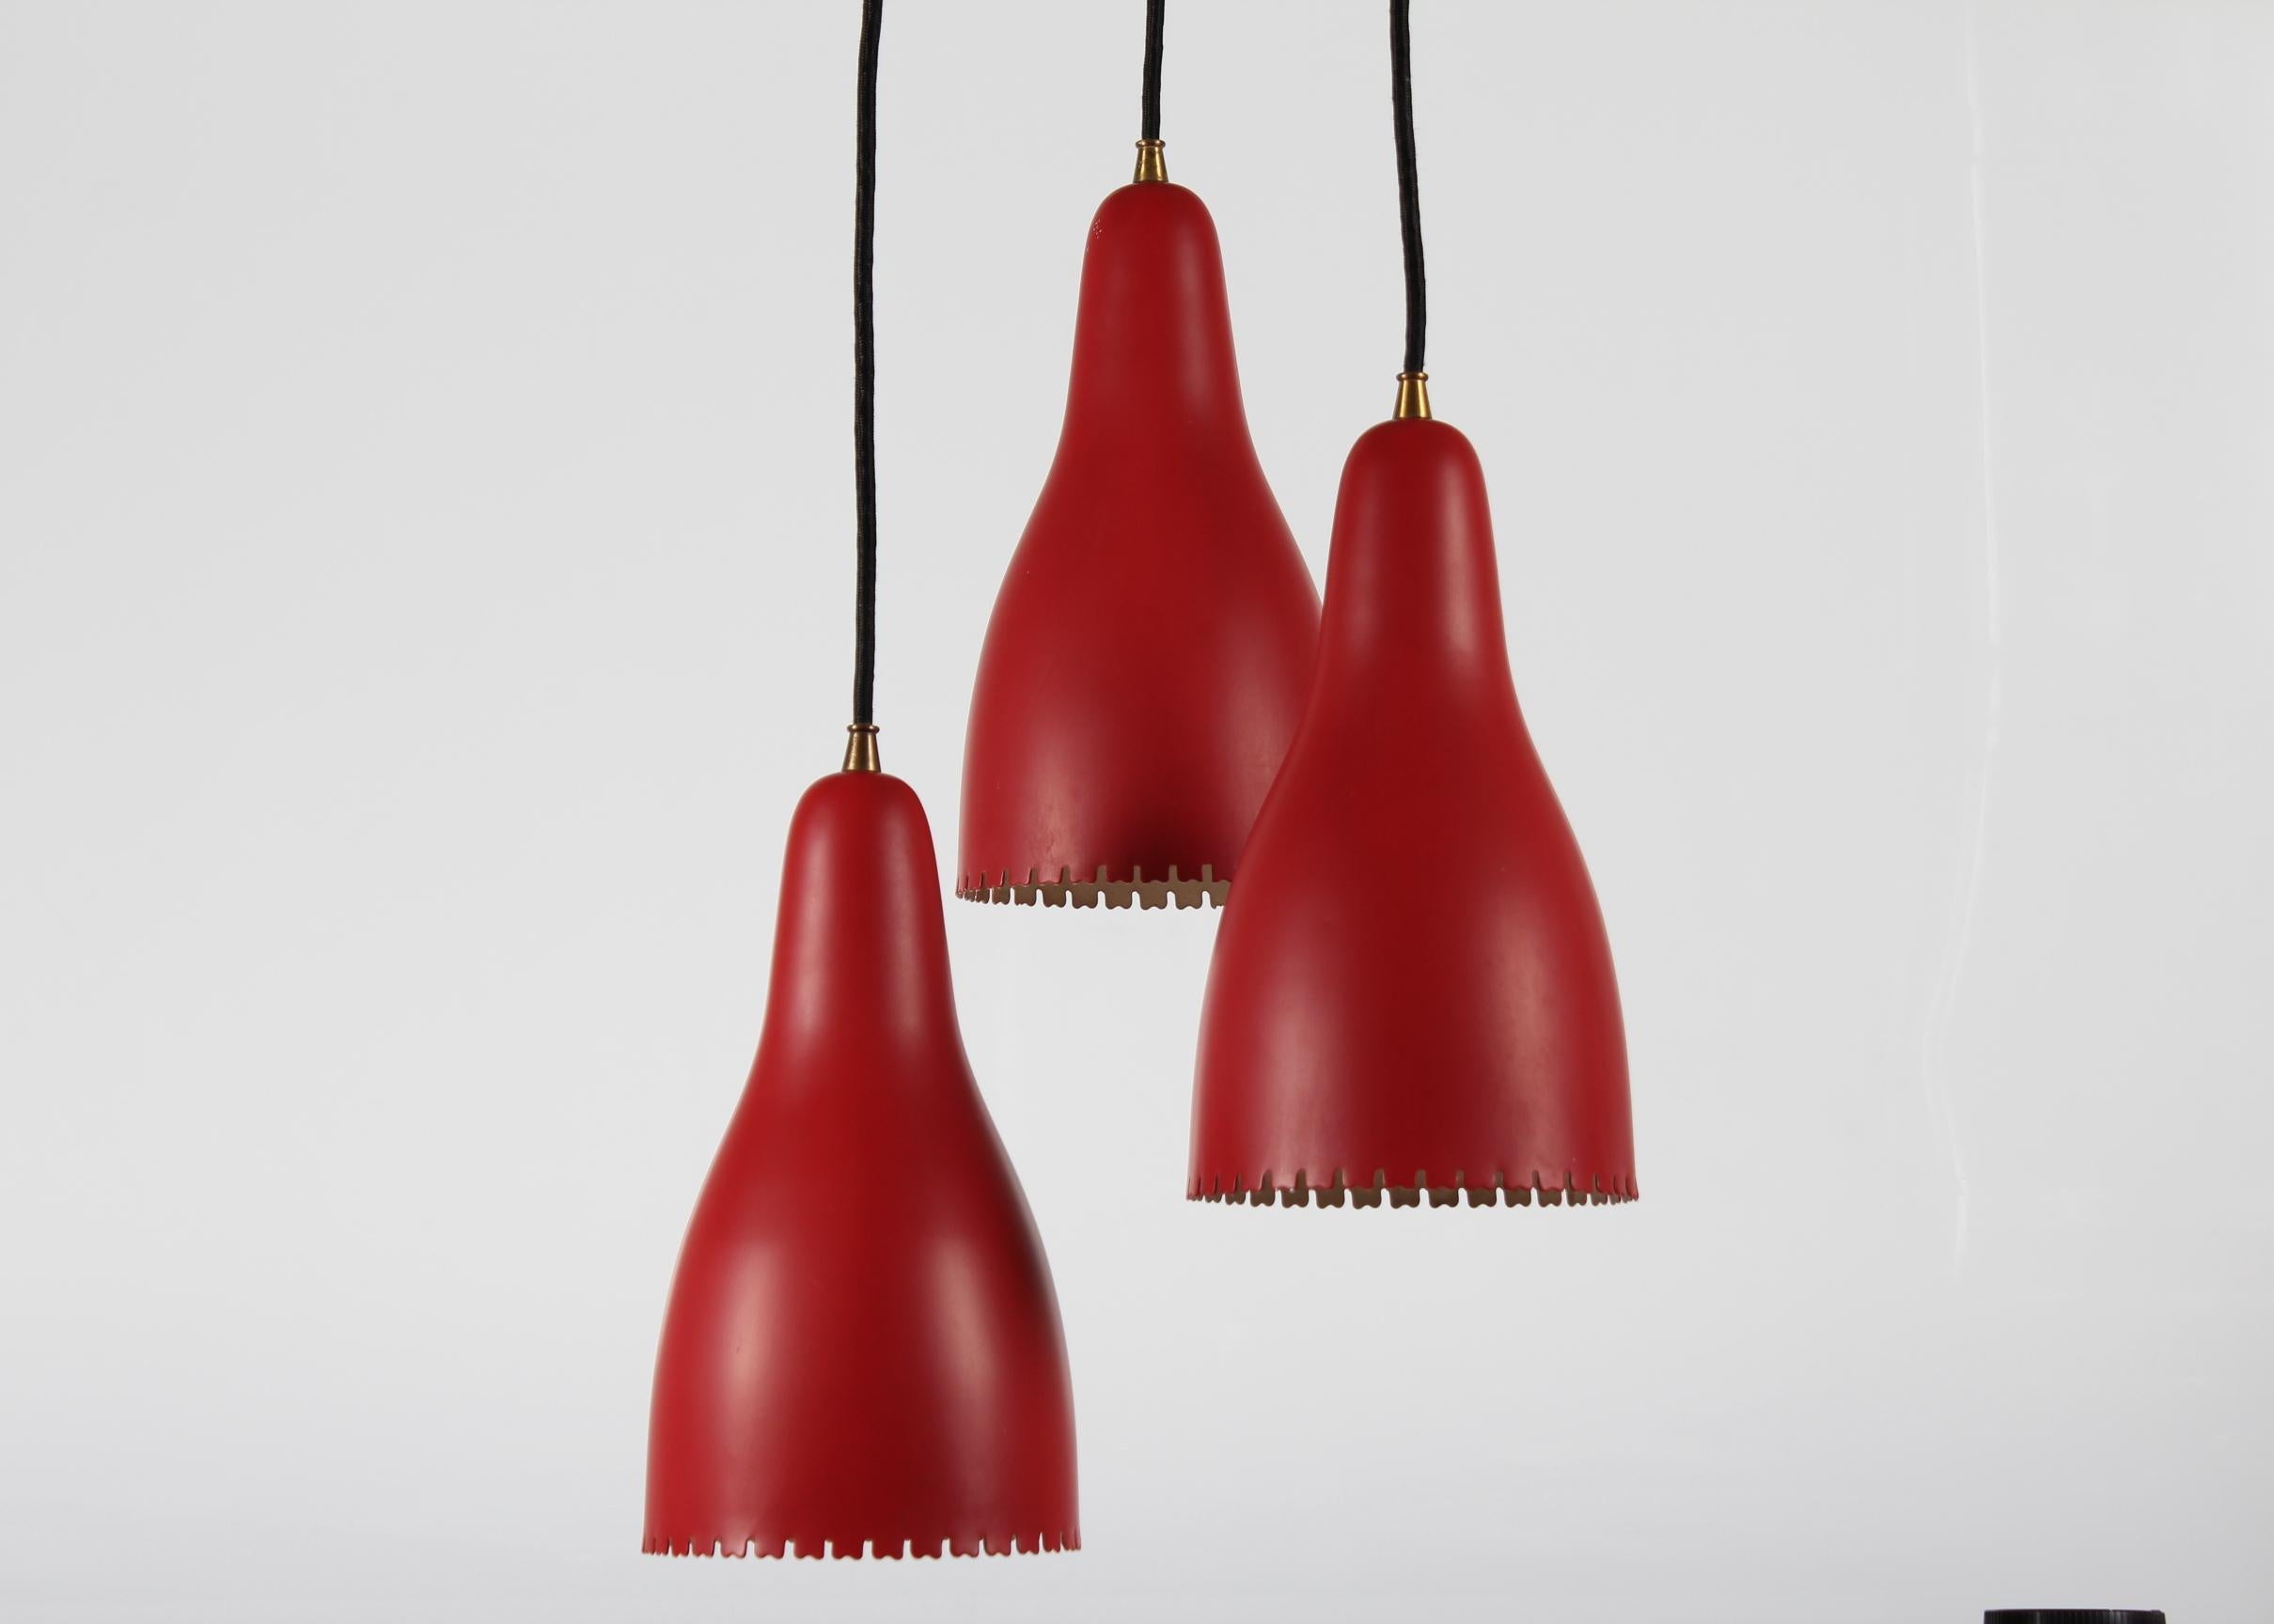 3-Cone chandelier designed by Bent Karlby for Lyfa Denmark

The metal shades are with red lacquer outside and white inside.
The chandelier has brass fittings and canopy

Measures: height: The length of the cord is adjustable 108 cm + 42 cm.